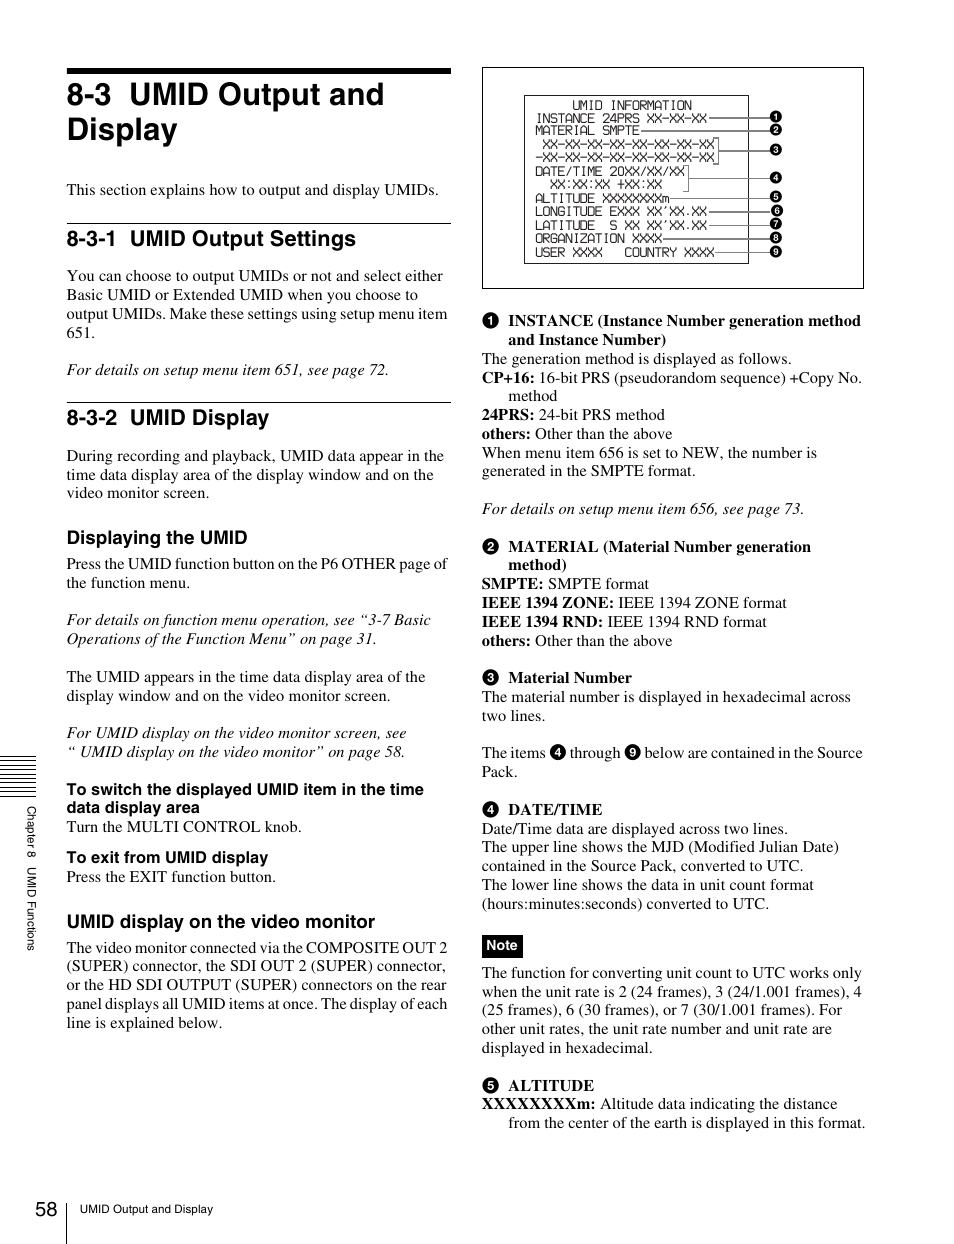 3 umid output and display, 3-1 umid output settings, 3-2 umid display | Umid output and display, Umid output settings, Umid display, Displaying the umid, Umid display on the video monitor | Sony HDW-S280 User Manual | Page 58 / 94